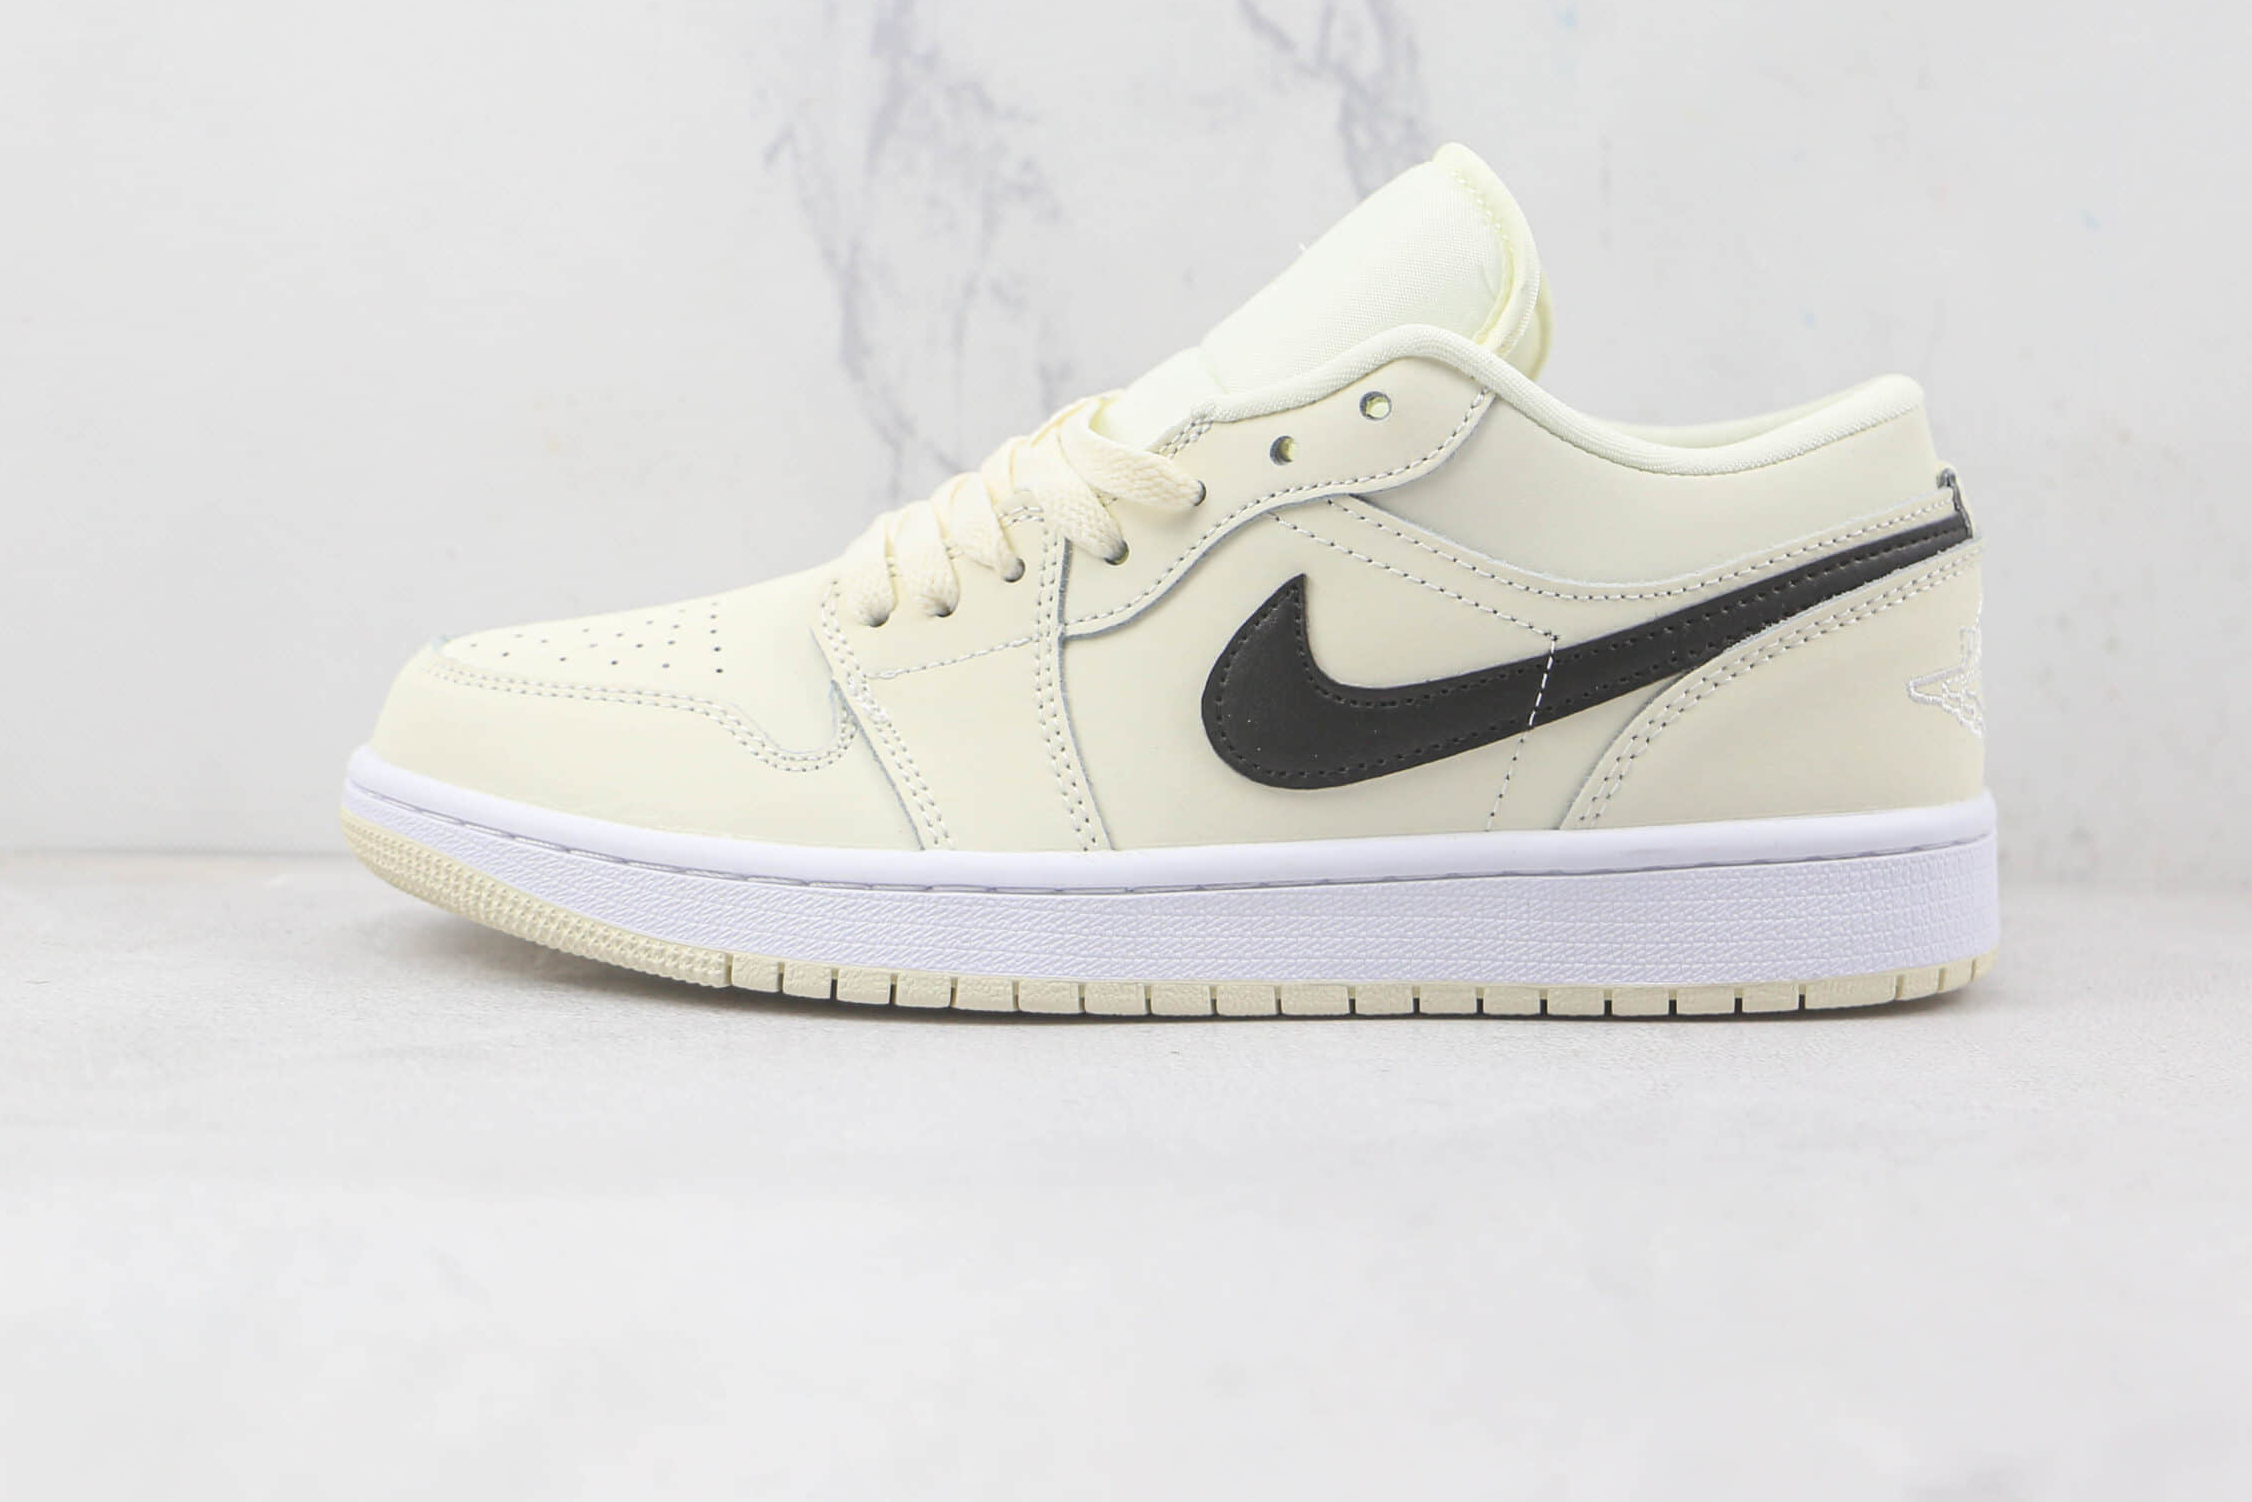 Air Jordan 1 Low Court Purple White 553558-500 - Stylish Sneakers for a Sporty Look